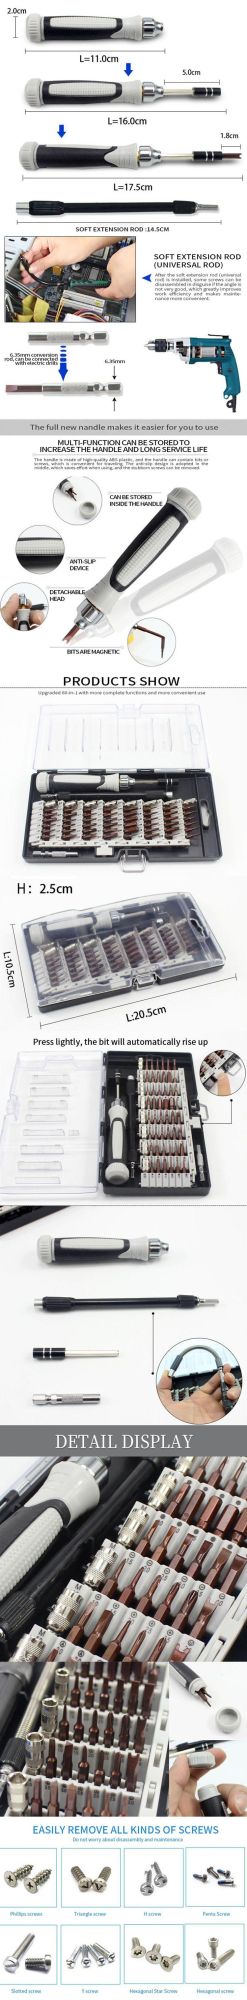 New 60-in-One Screwdriver Set for Mobile Phone and Notebook Repair and Disassembly Tools Imported S2 Steel